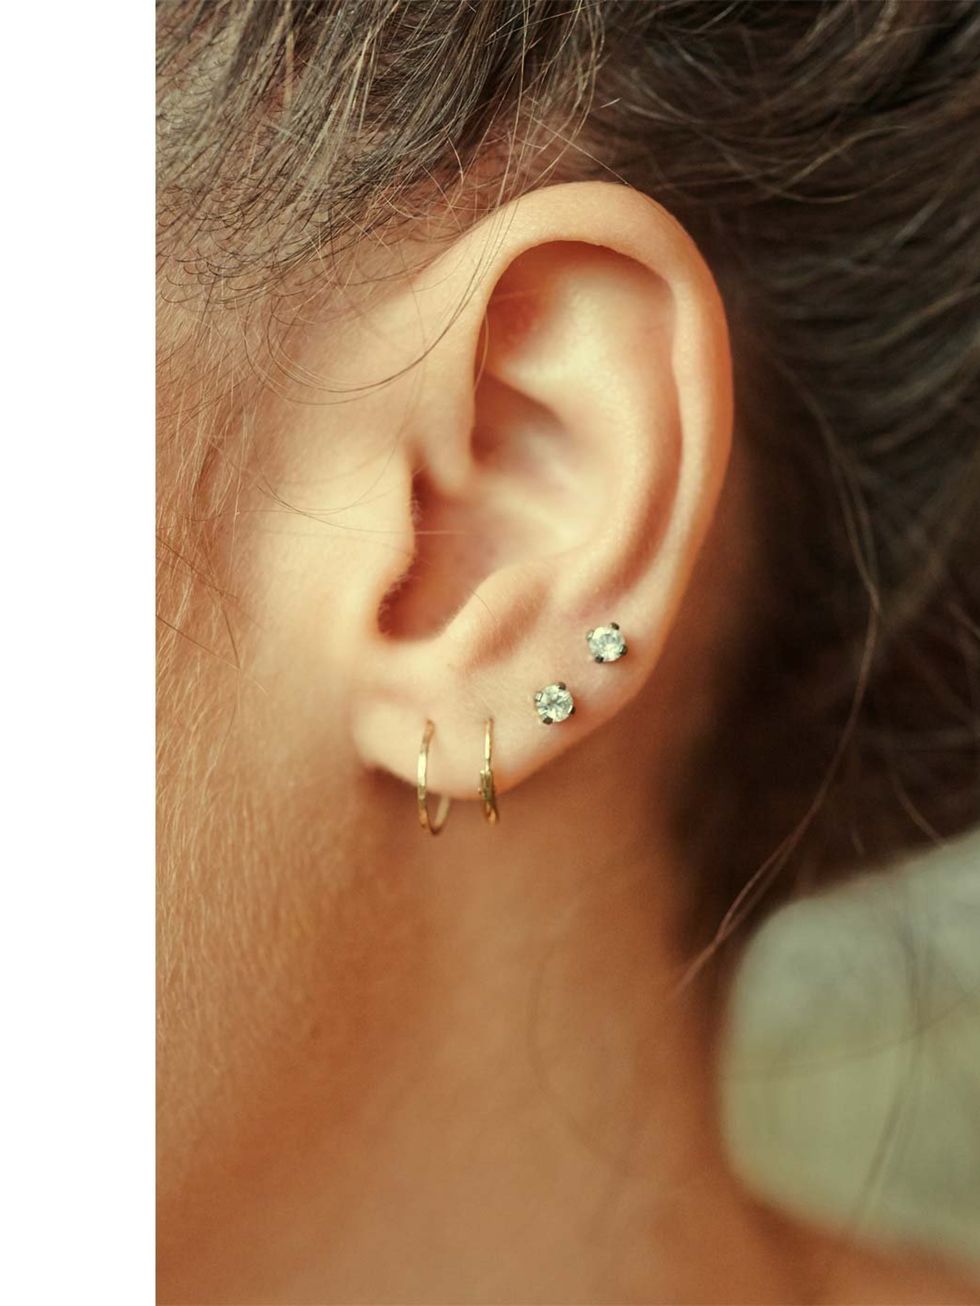 &lt;p&gt;&#039;I&#039;m in love with a shop in Brooklyn, NY called &#039;Catbird&#039; they sell the best jewelery. One of my sleepers is from Catbird, the other is from H Samuel - they actually do brilliant sleepers. I love a jeweled ear!&#039;&lt;/p&gt;